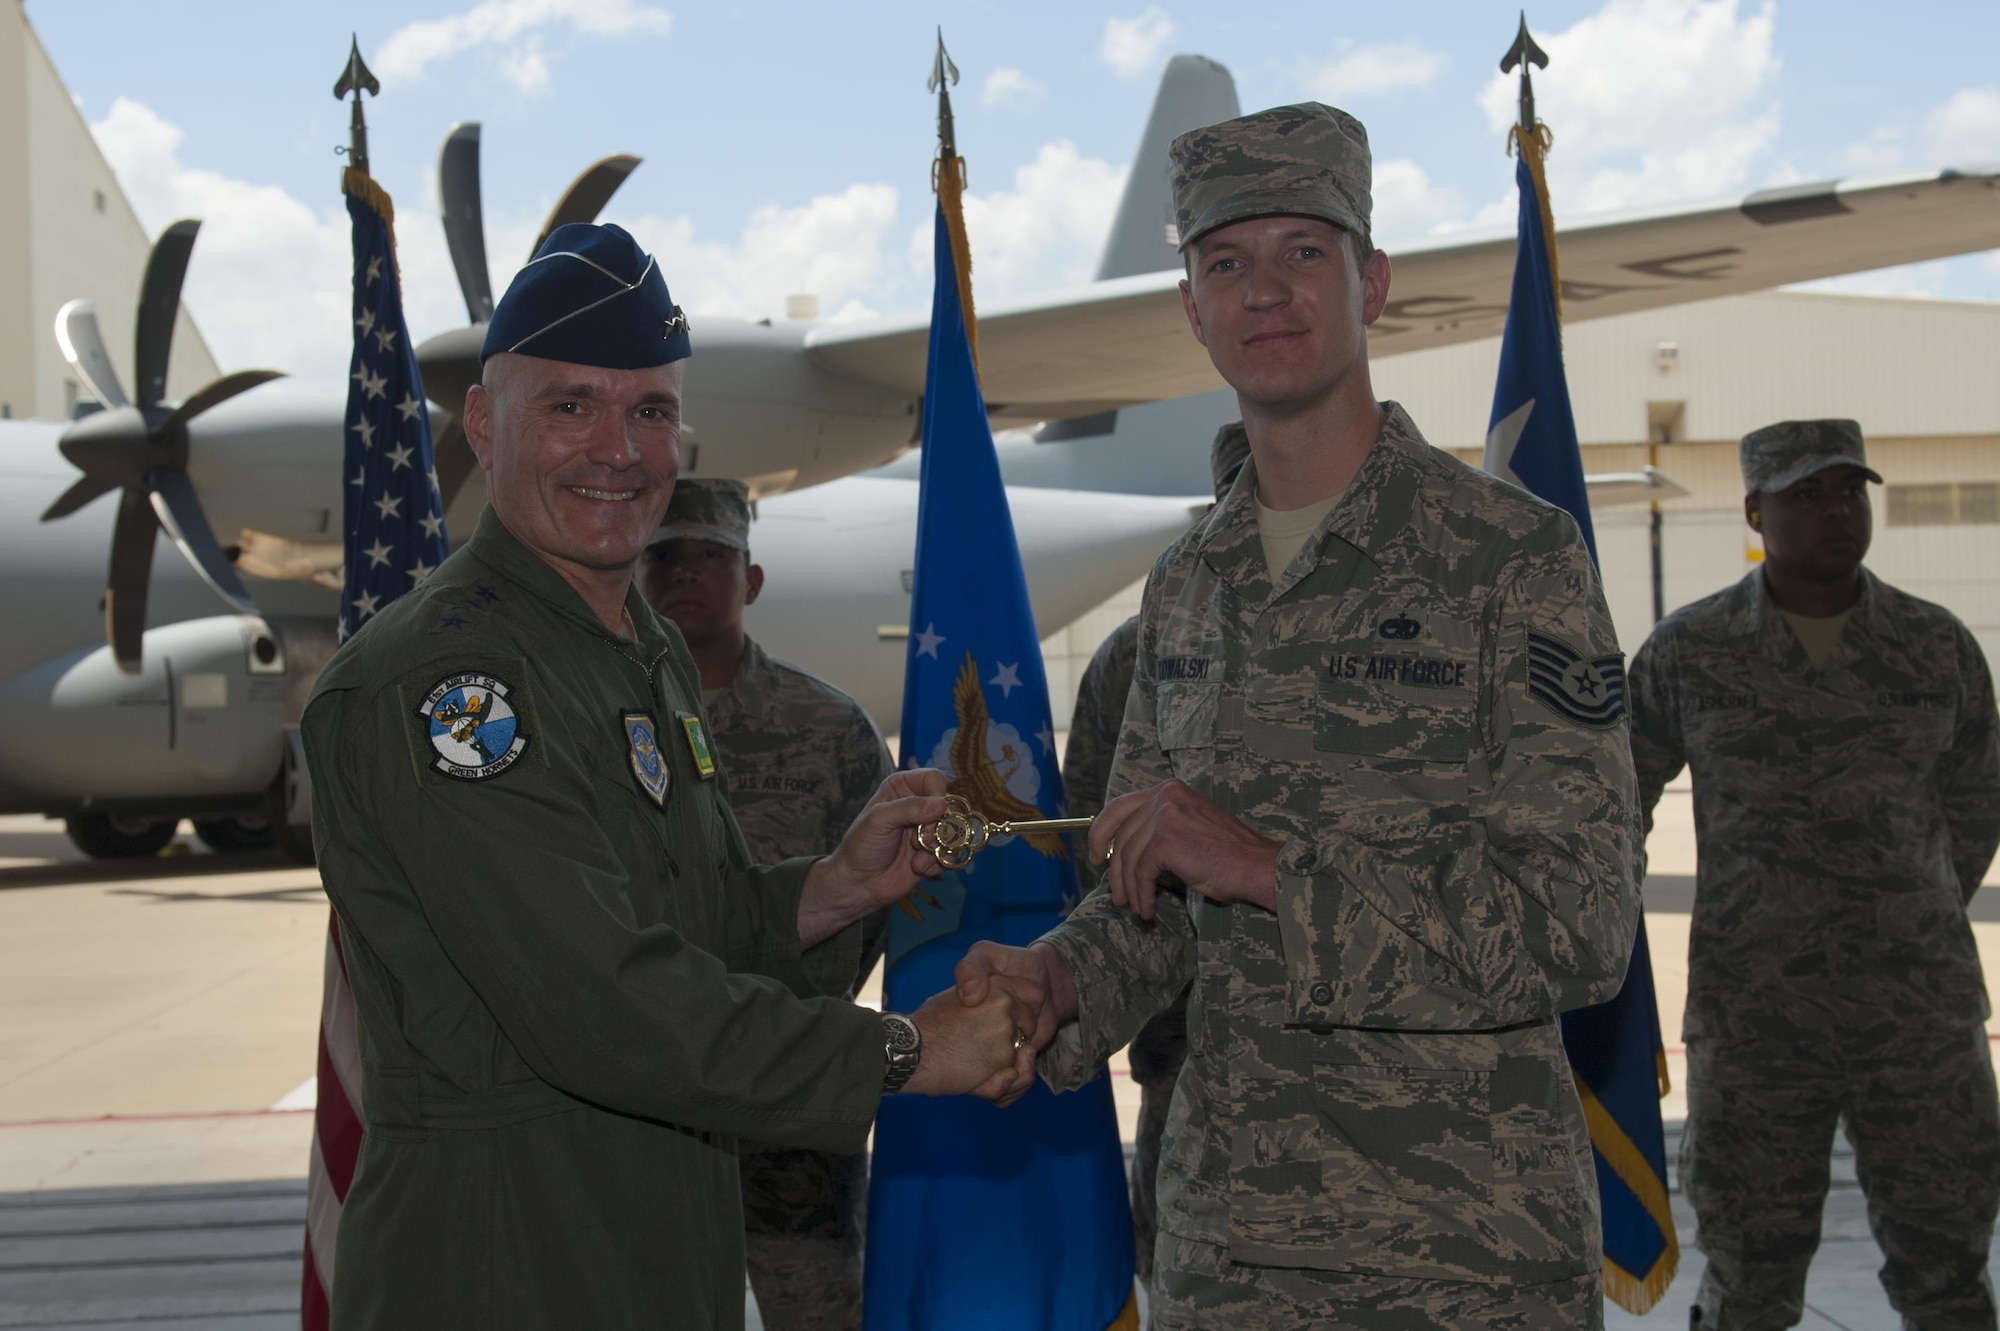 U.S. Air Force Gen. Carlton D. Everhart II, Air Mobility Command commander, presents a ceremonial C-130J key to U.S. Air Force Tech. Sgt. James Kowalski, 19th Aircraft Maintenance Squadron C-130J crew chief, June 20, 2016, at Little Rock Air Force Base, Ark. The final C-130J completed the H-model to J-model transition for the 19th Airlift Wing’s fleet. (U.S. Air Force photo/Senior Airman Harry Brexel)